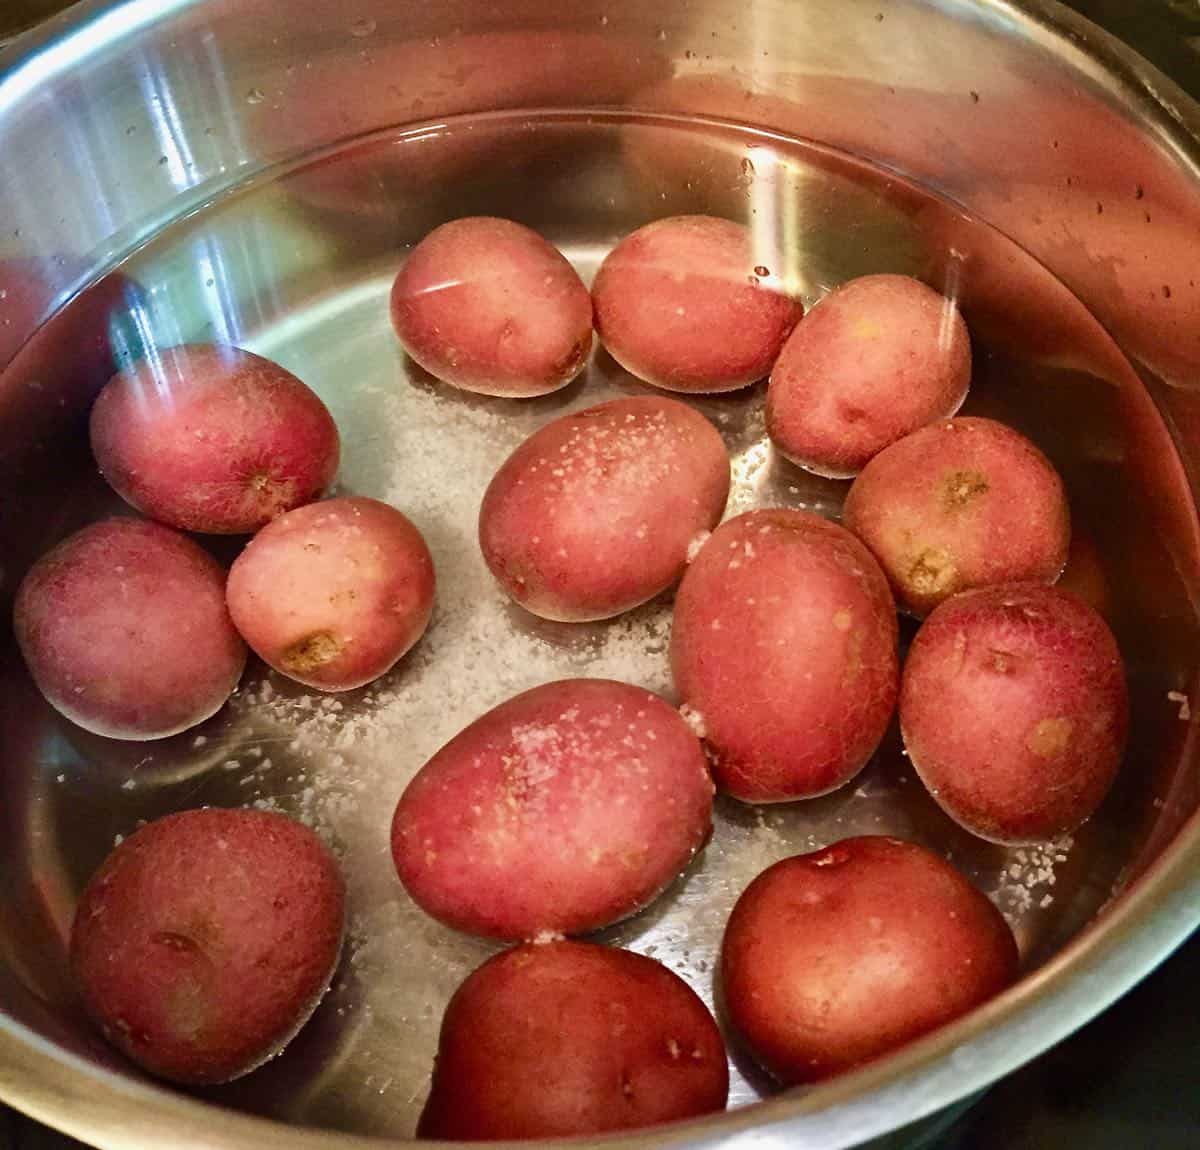 A large pan with potatoes in water on the stove.